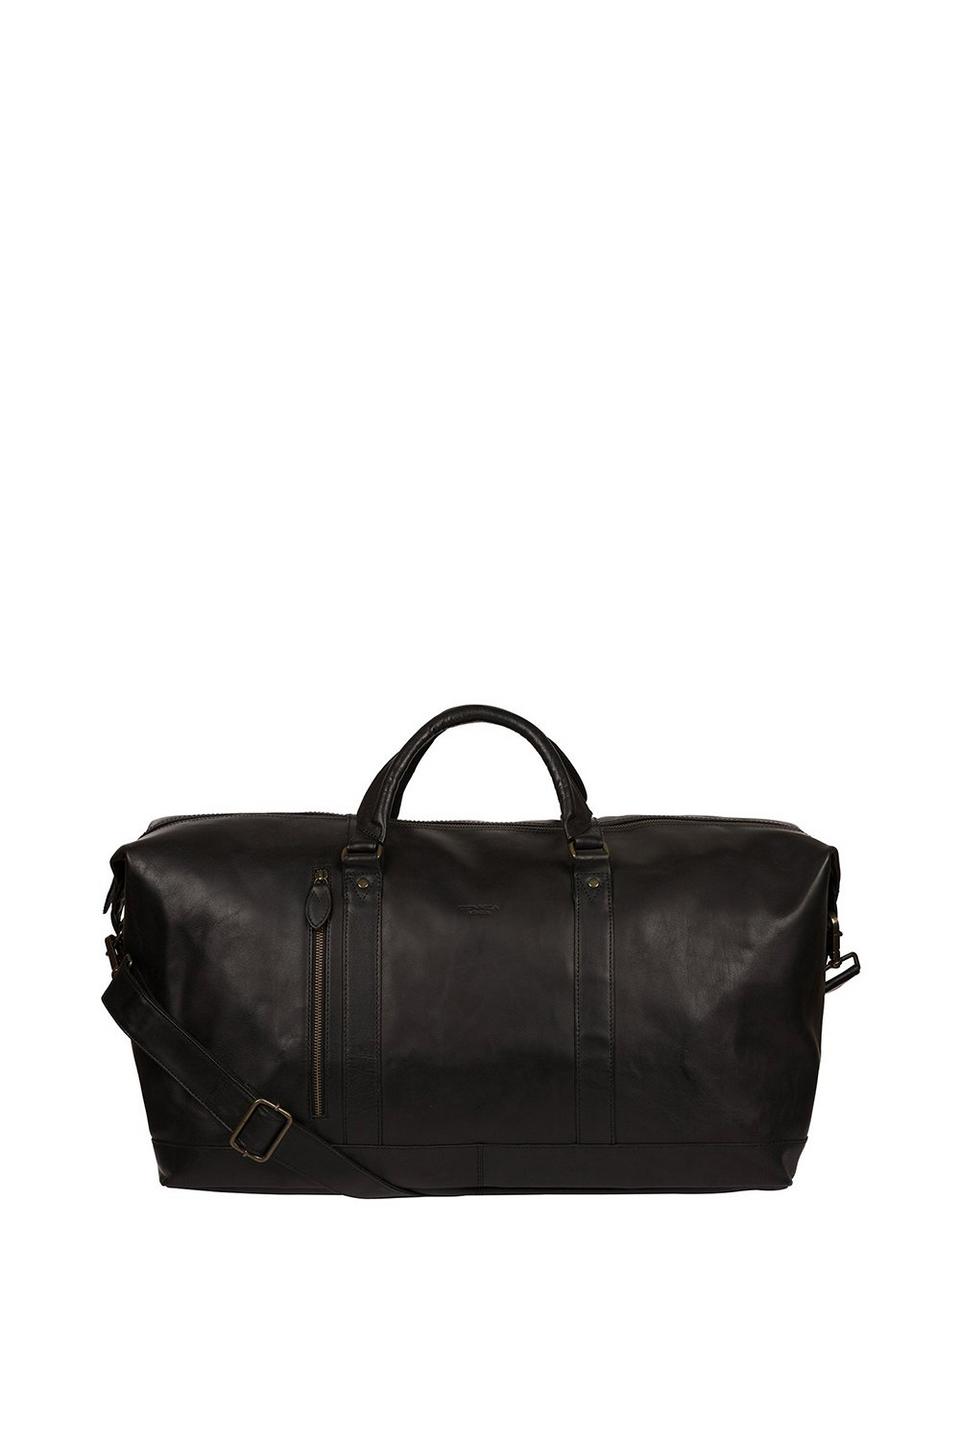 Bags & Wallets | 'Gerson' Leather Holdall | Conkca London